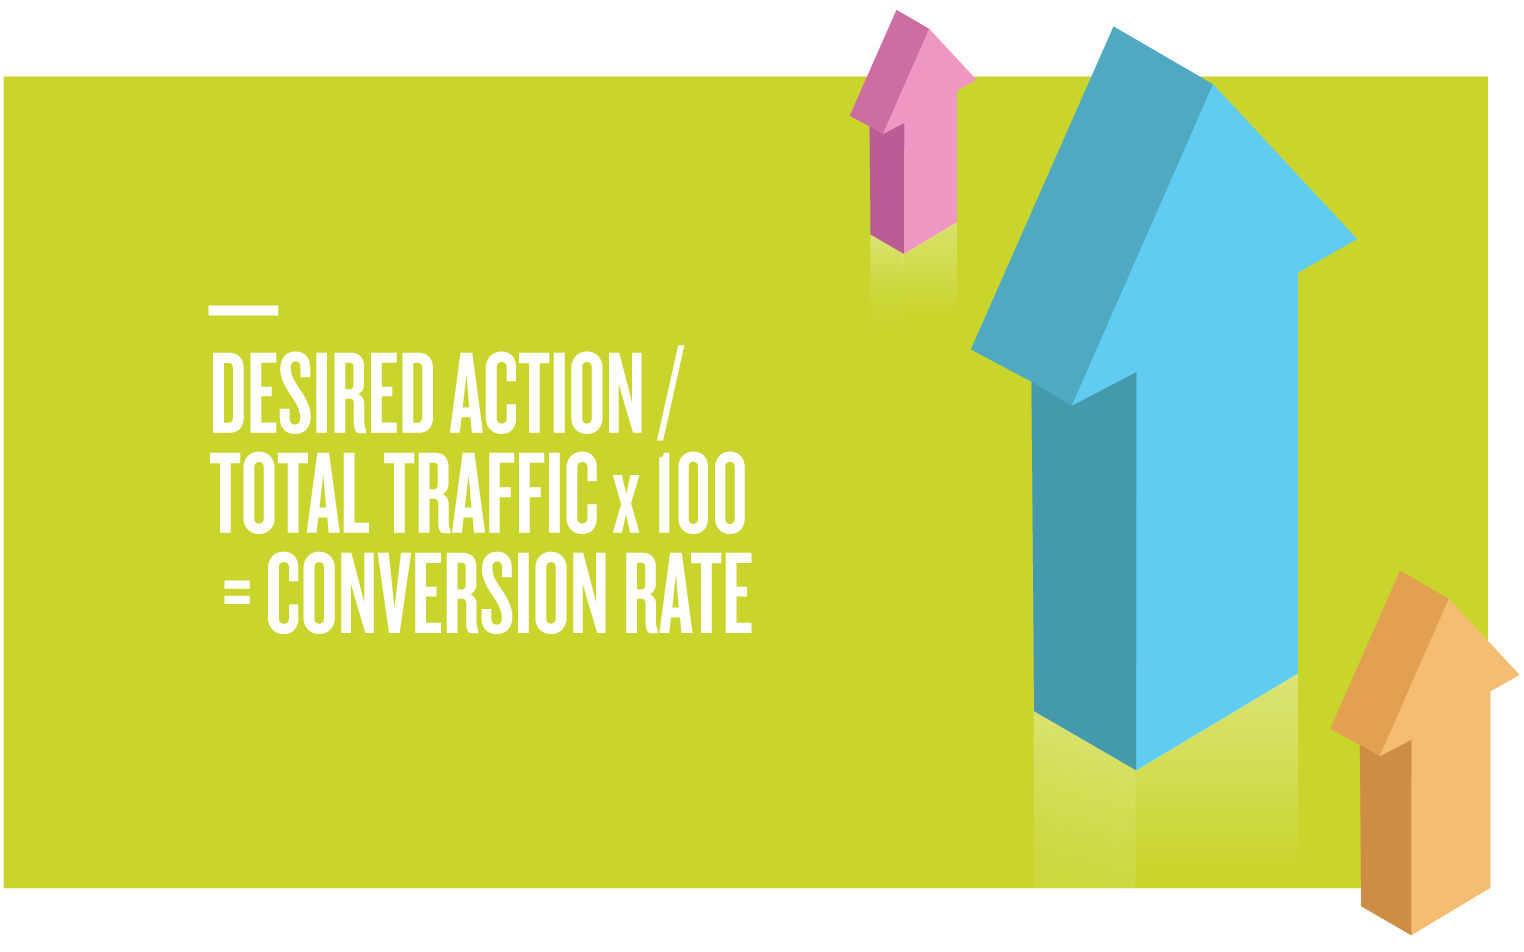 Desired Action / Total Traffic = Conversion Rate 